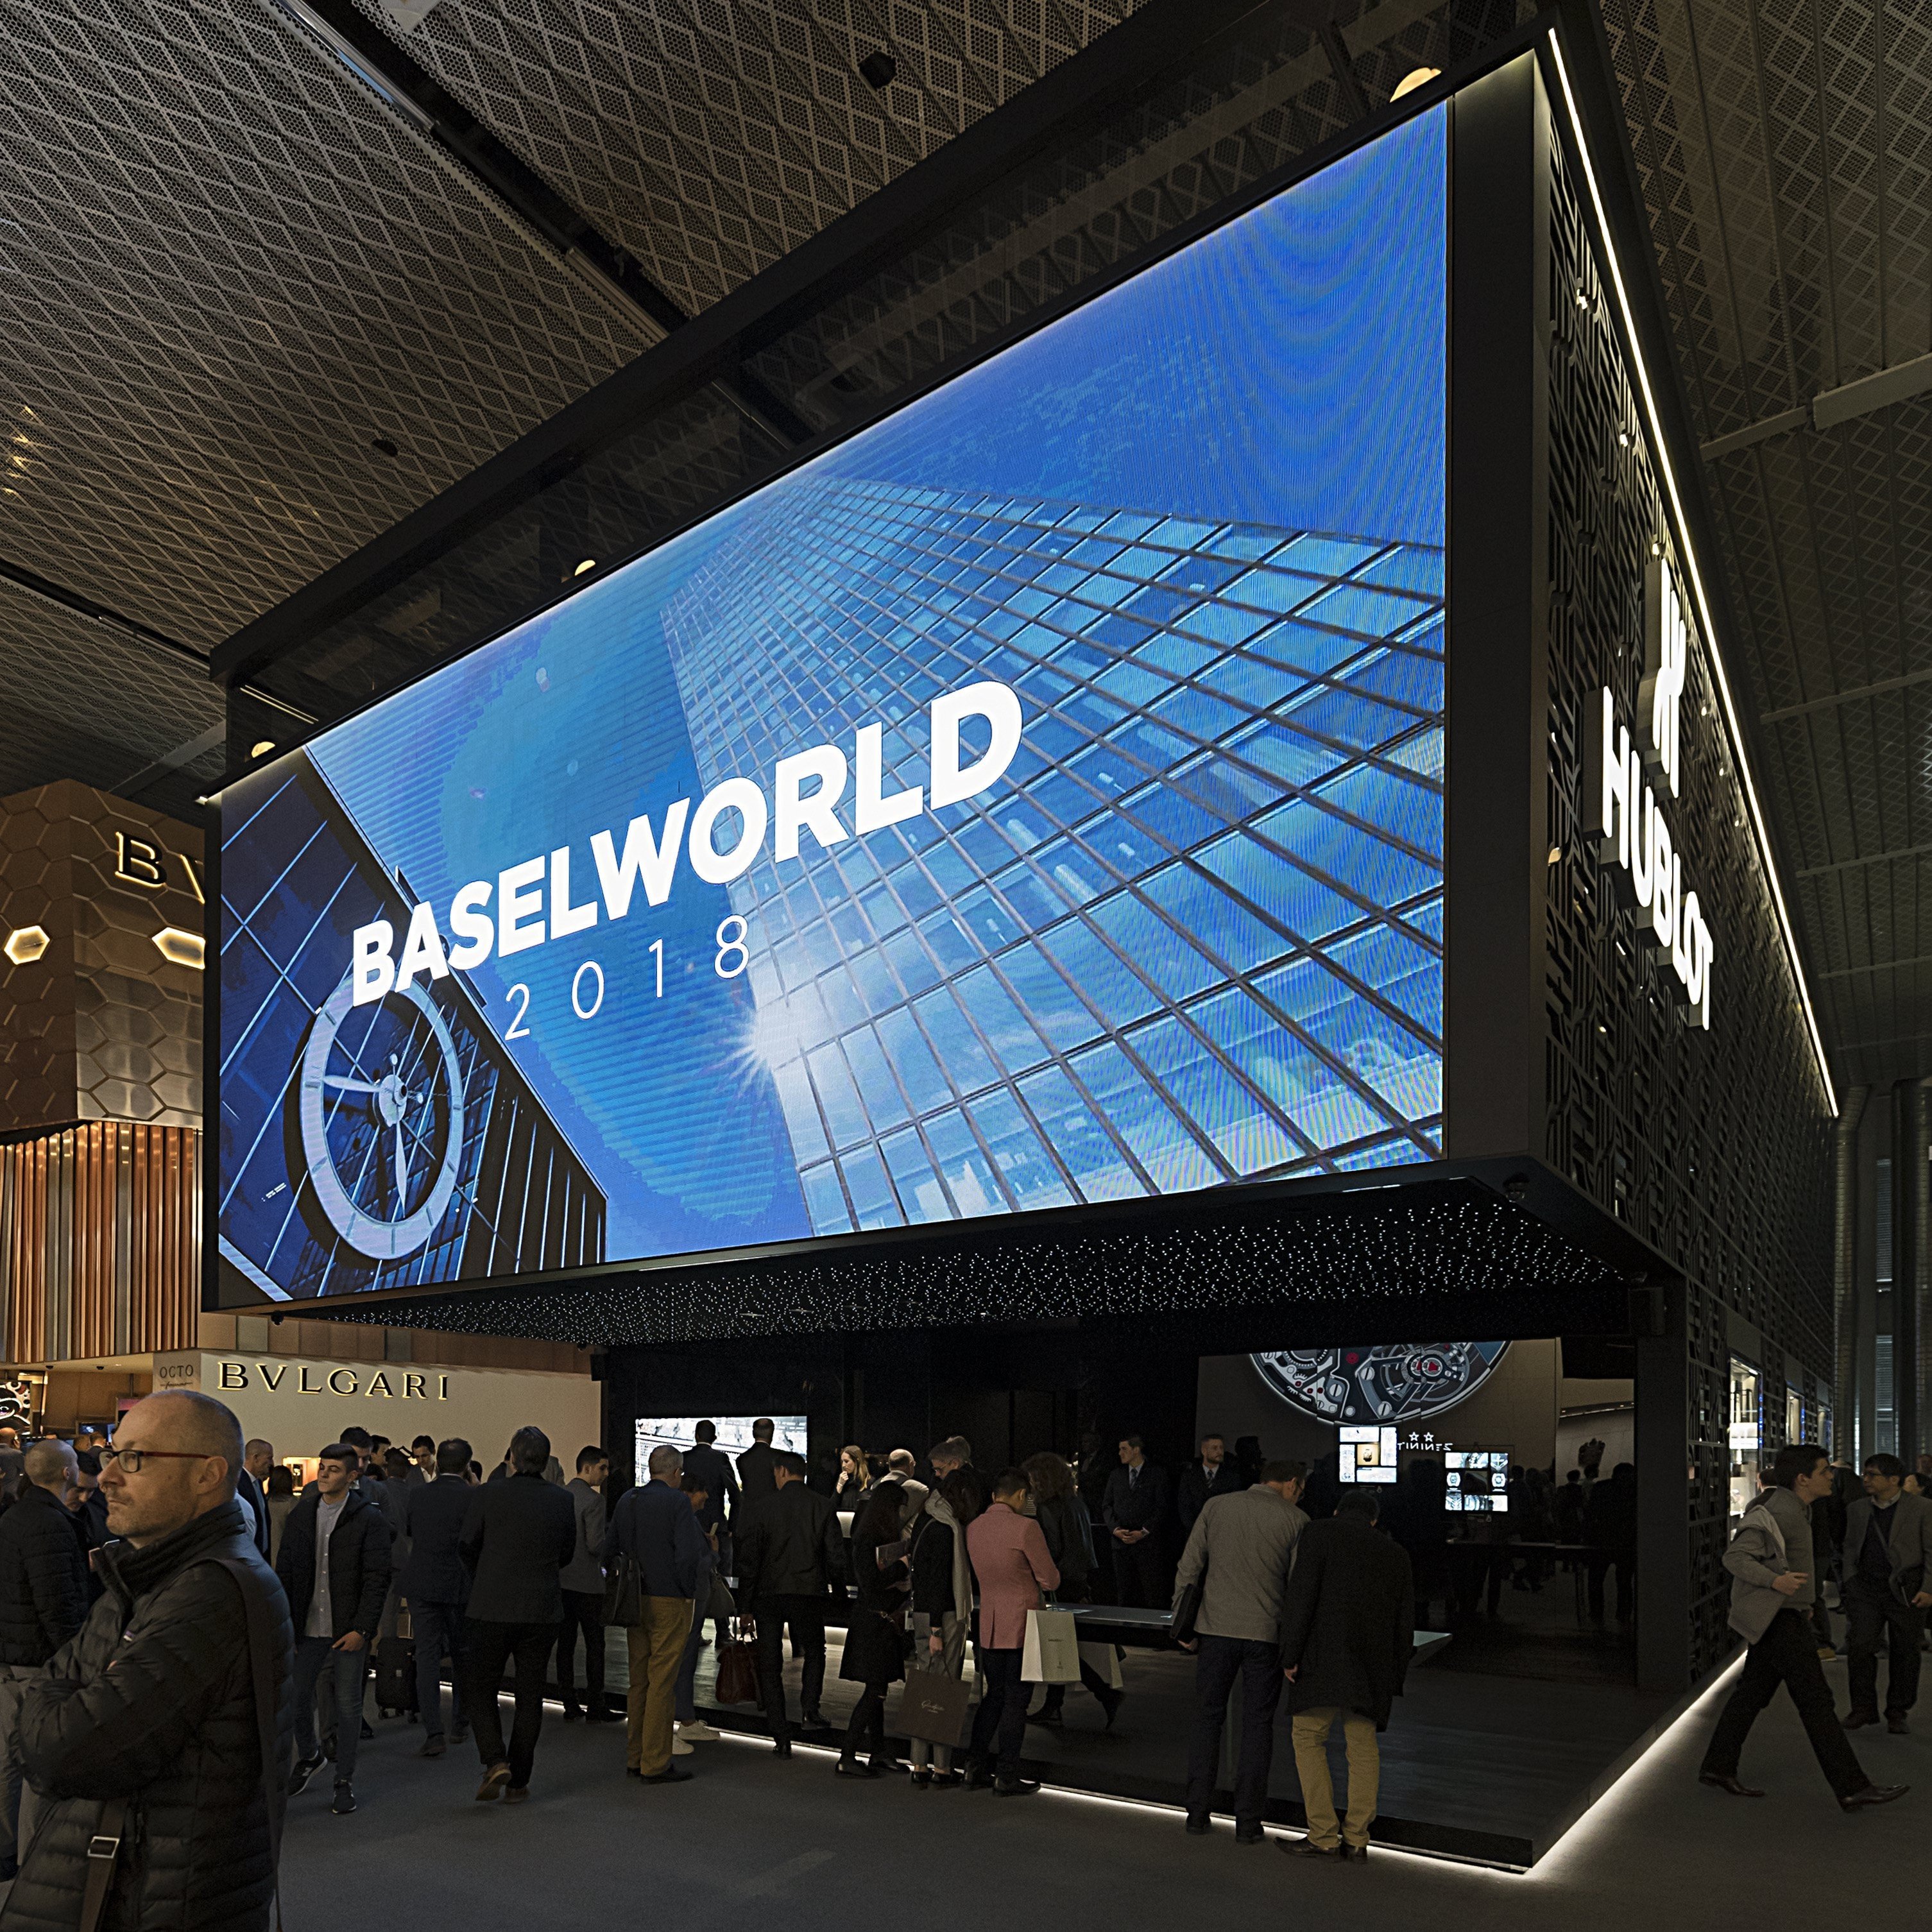 The Hublot stand at Baselworld. This year’s watch show begins on March 21. Photo: EPA